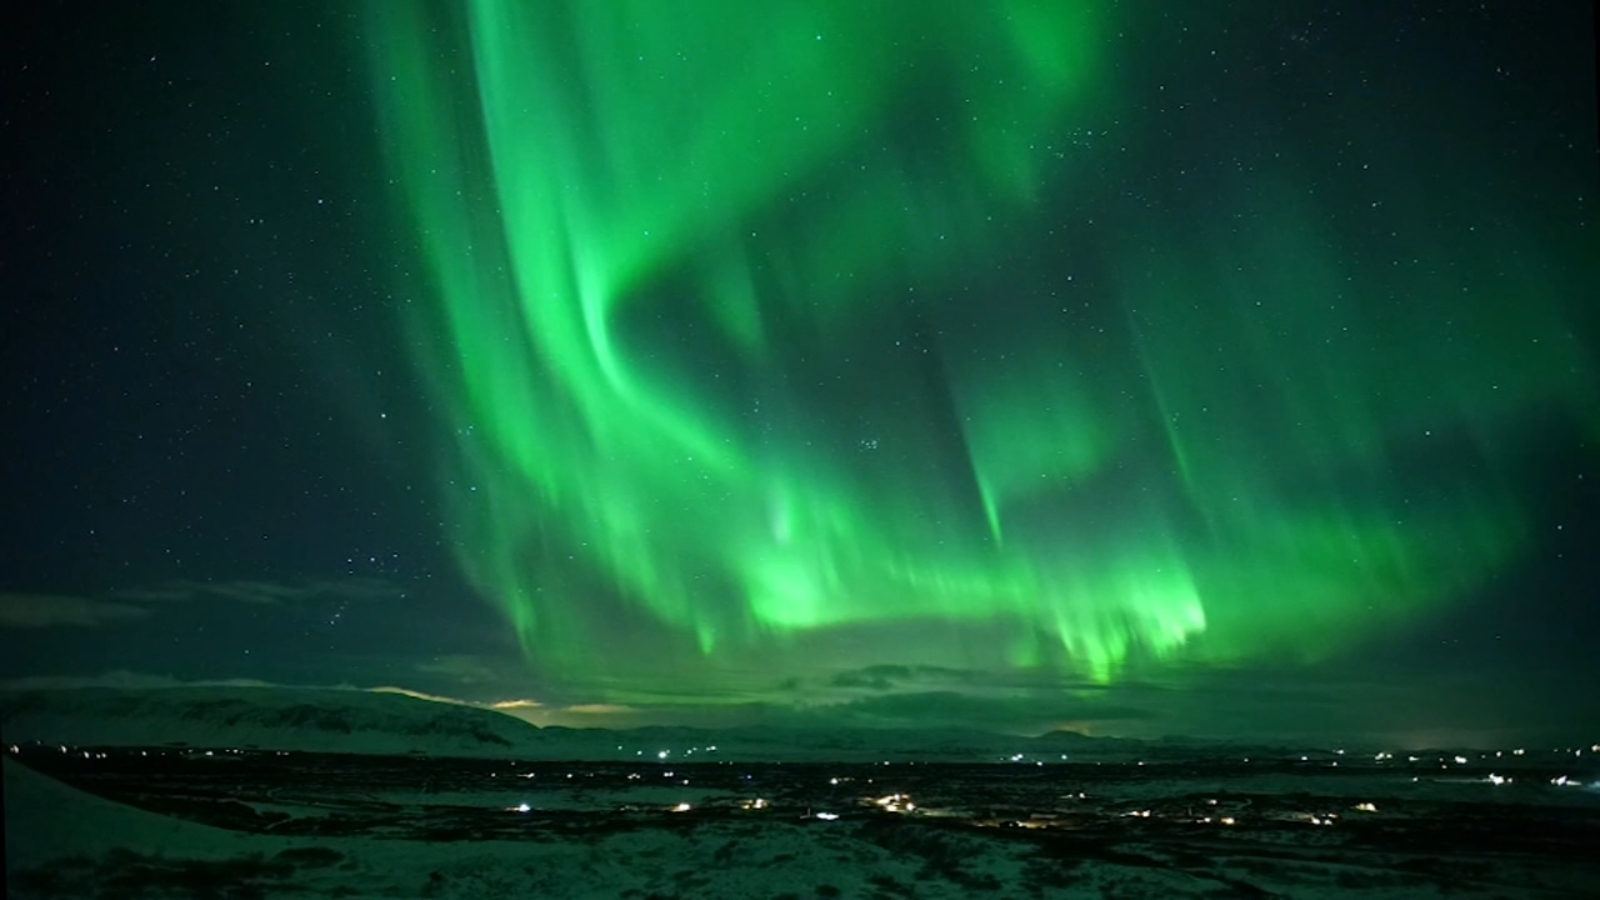 Can I see the northern lights this weekend? Strong solar storm could disrupt communications and produce auroras in the US [Video]